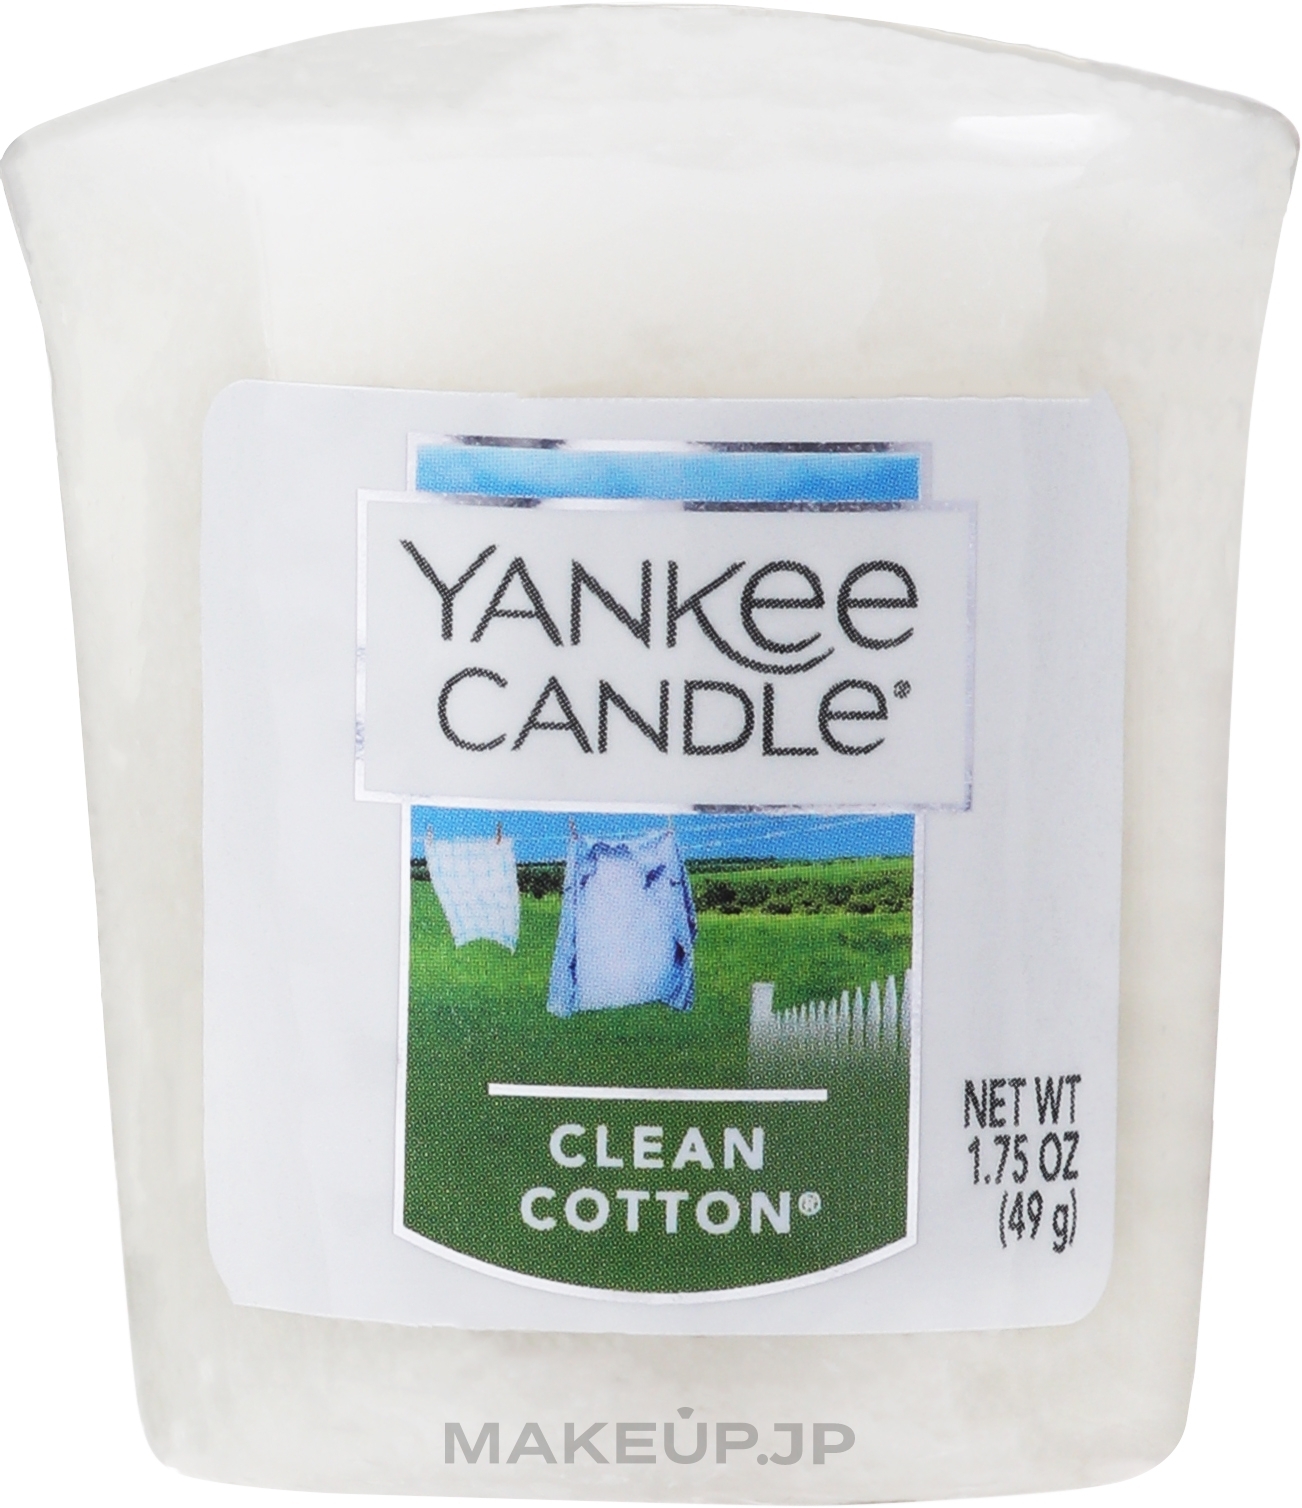 Scented Candle - Yankee Candle Clean Cotton Sampler Votive Candle — photo 49 g